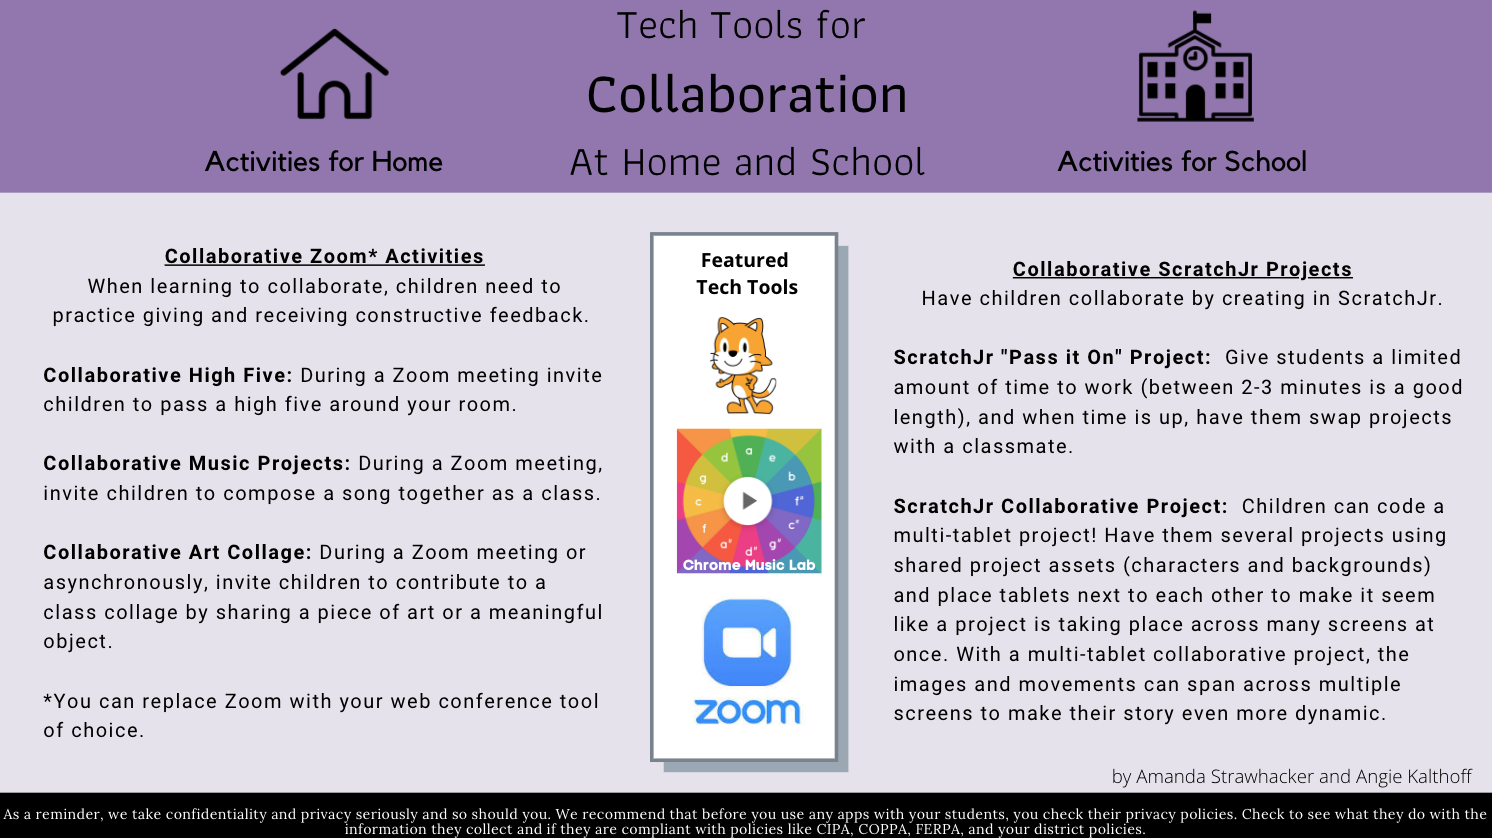 Webpage screenshot titled, "Tech Tools for Collaboration at Home and School"